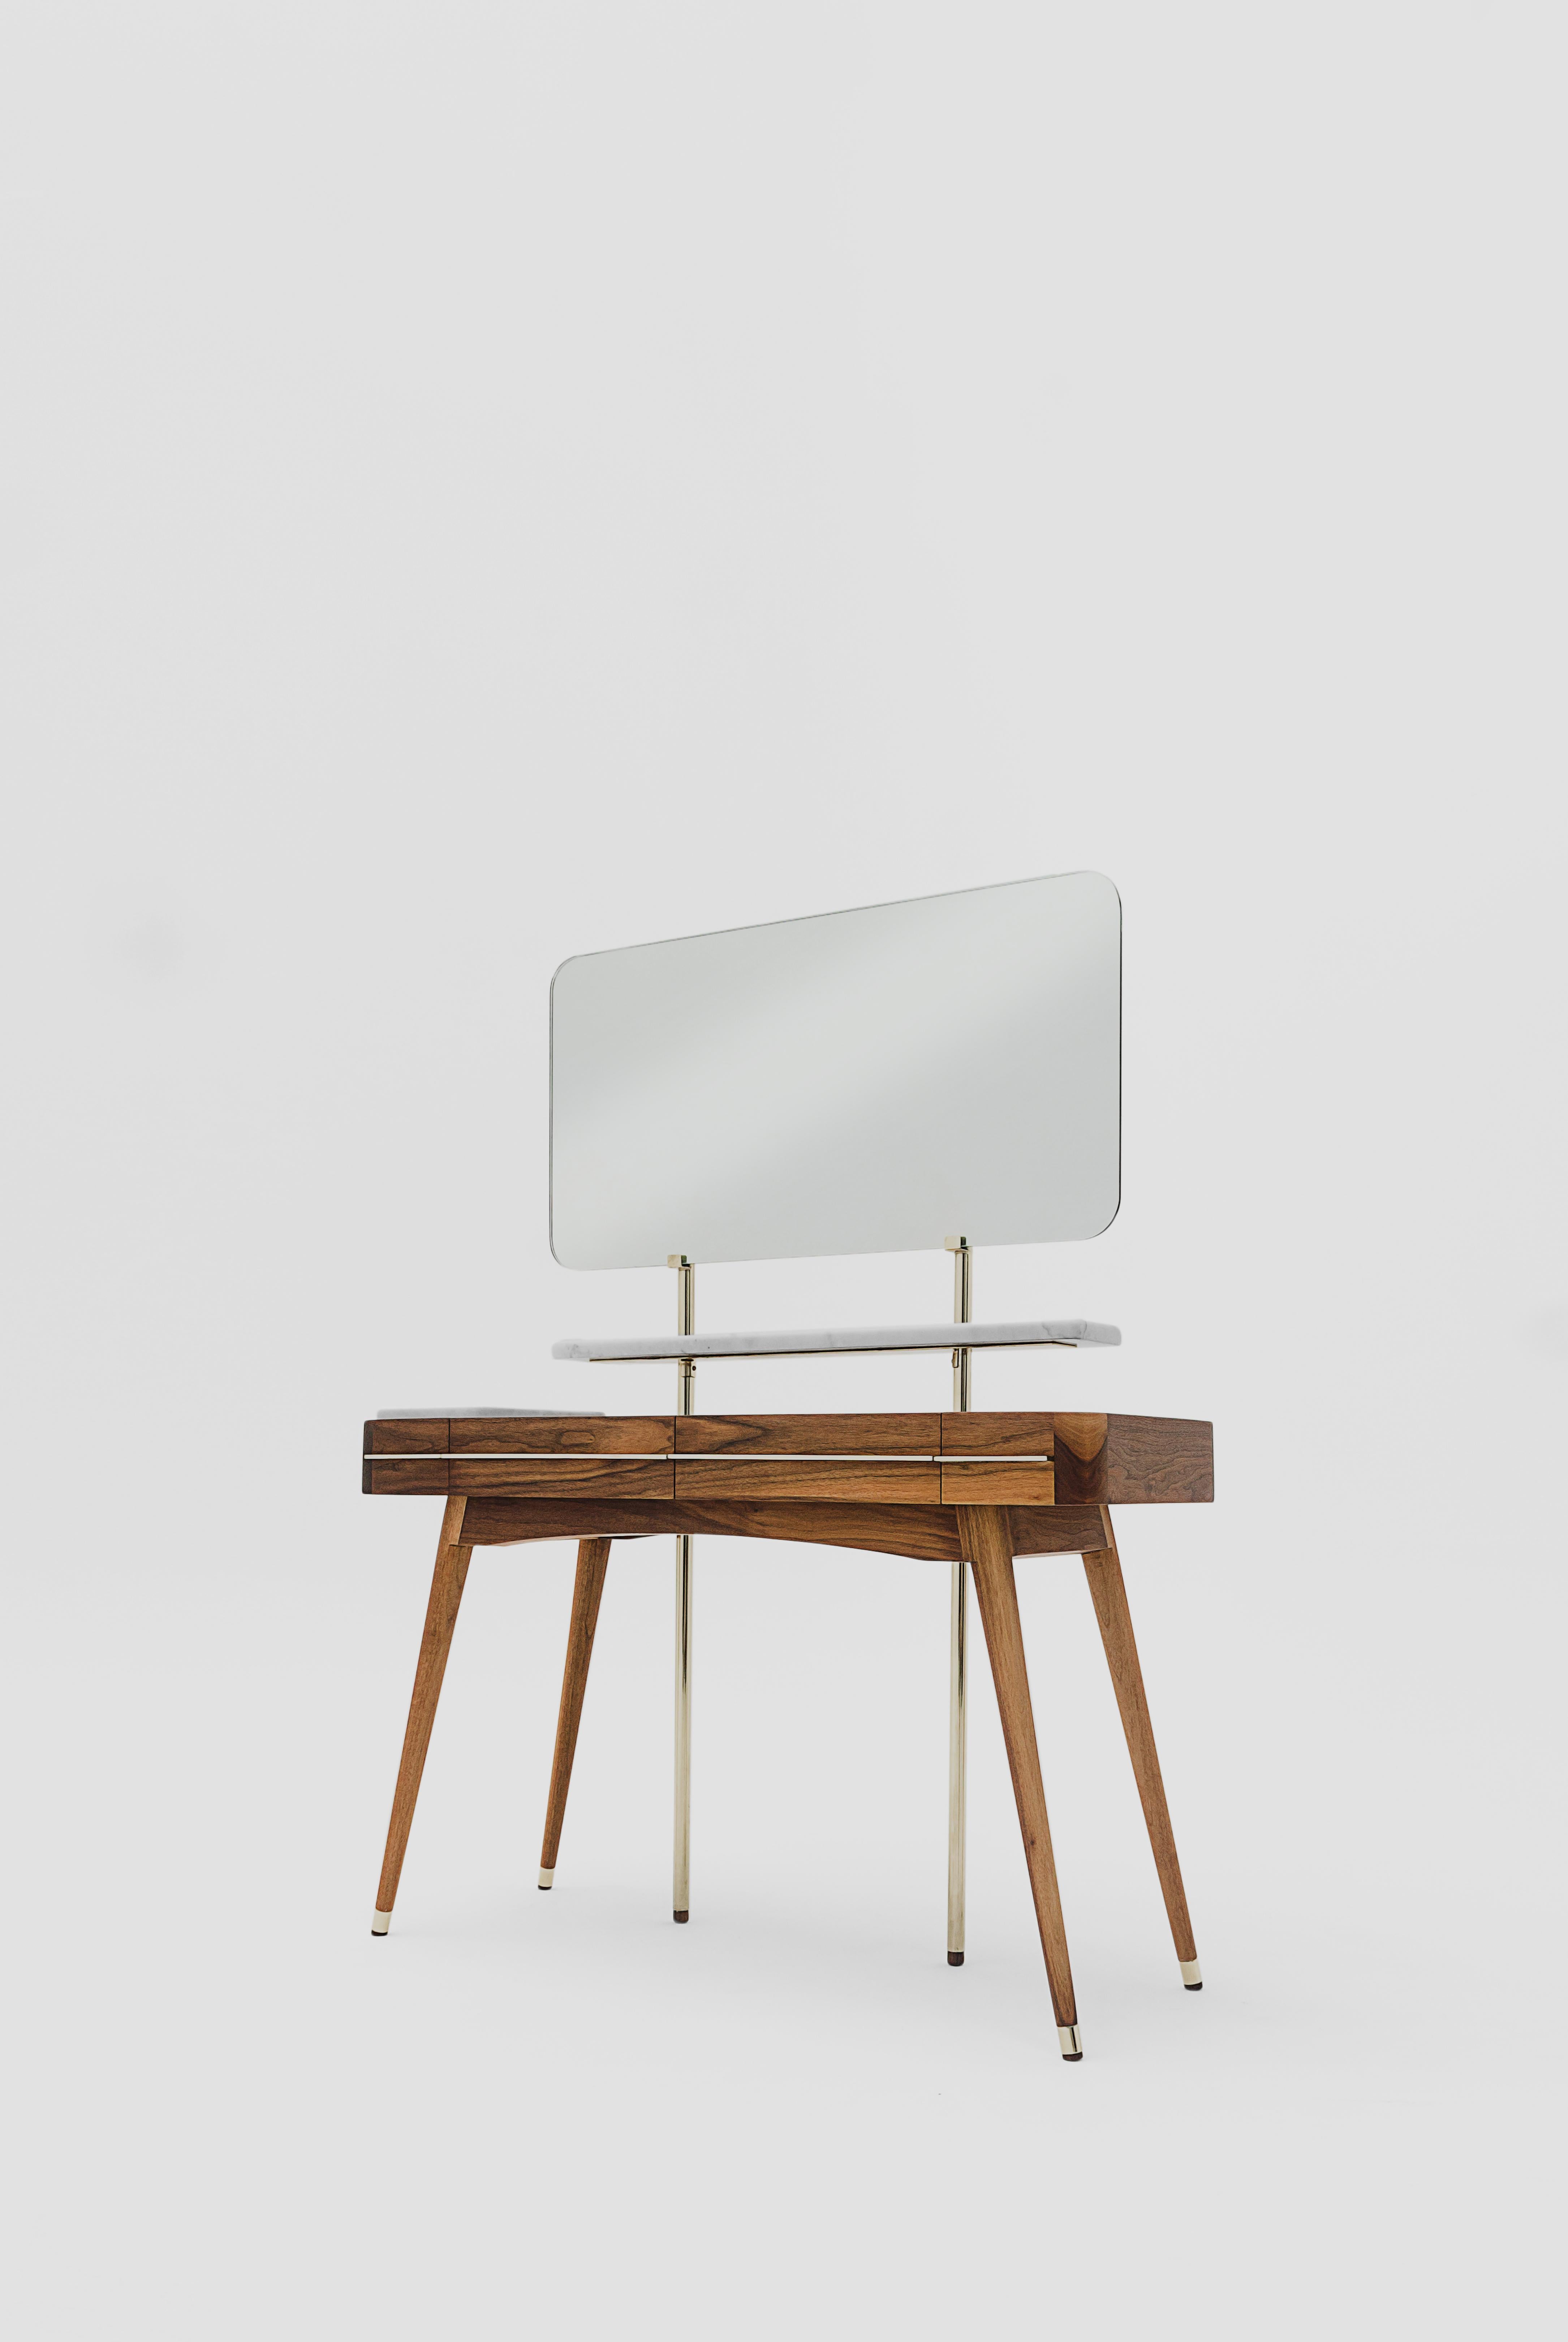 Antonia dresser by Lorena Vieyra
Dimensions: D 120 x W 47 x H 160 cm
Materials: walnut wood, Calcatta marble.

Dressing table made of walnut and steel. Includes mirror without distortion and Calacatta marble.

Architect from the Universidad